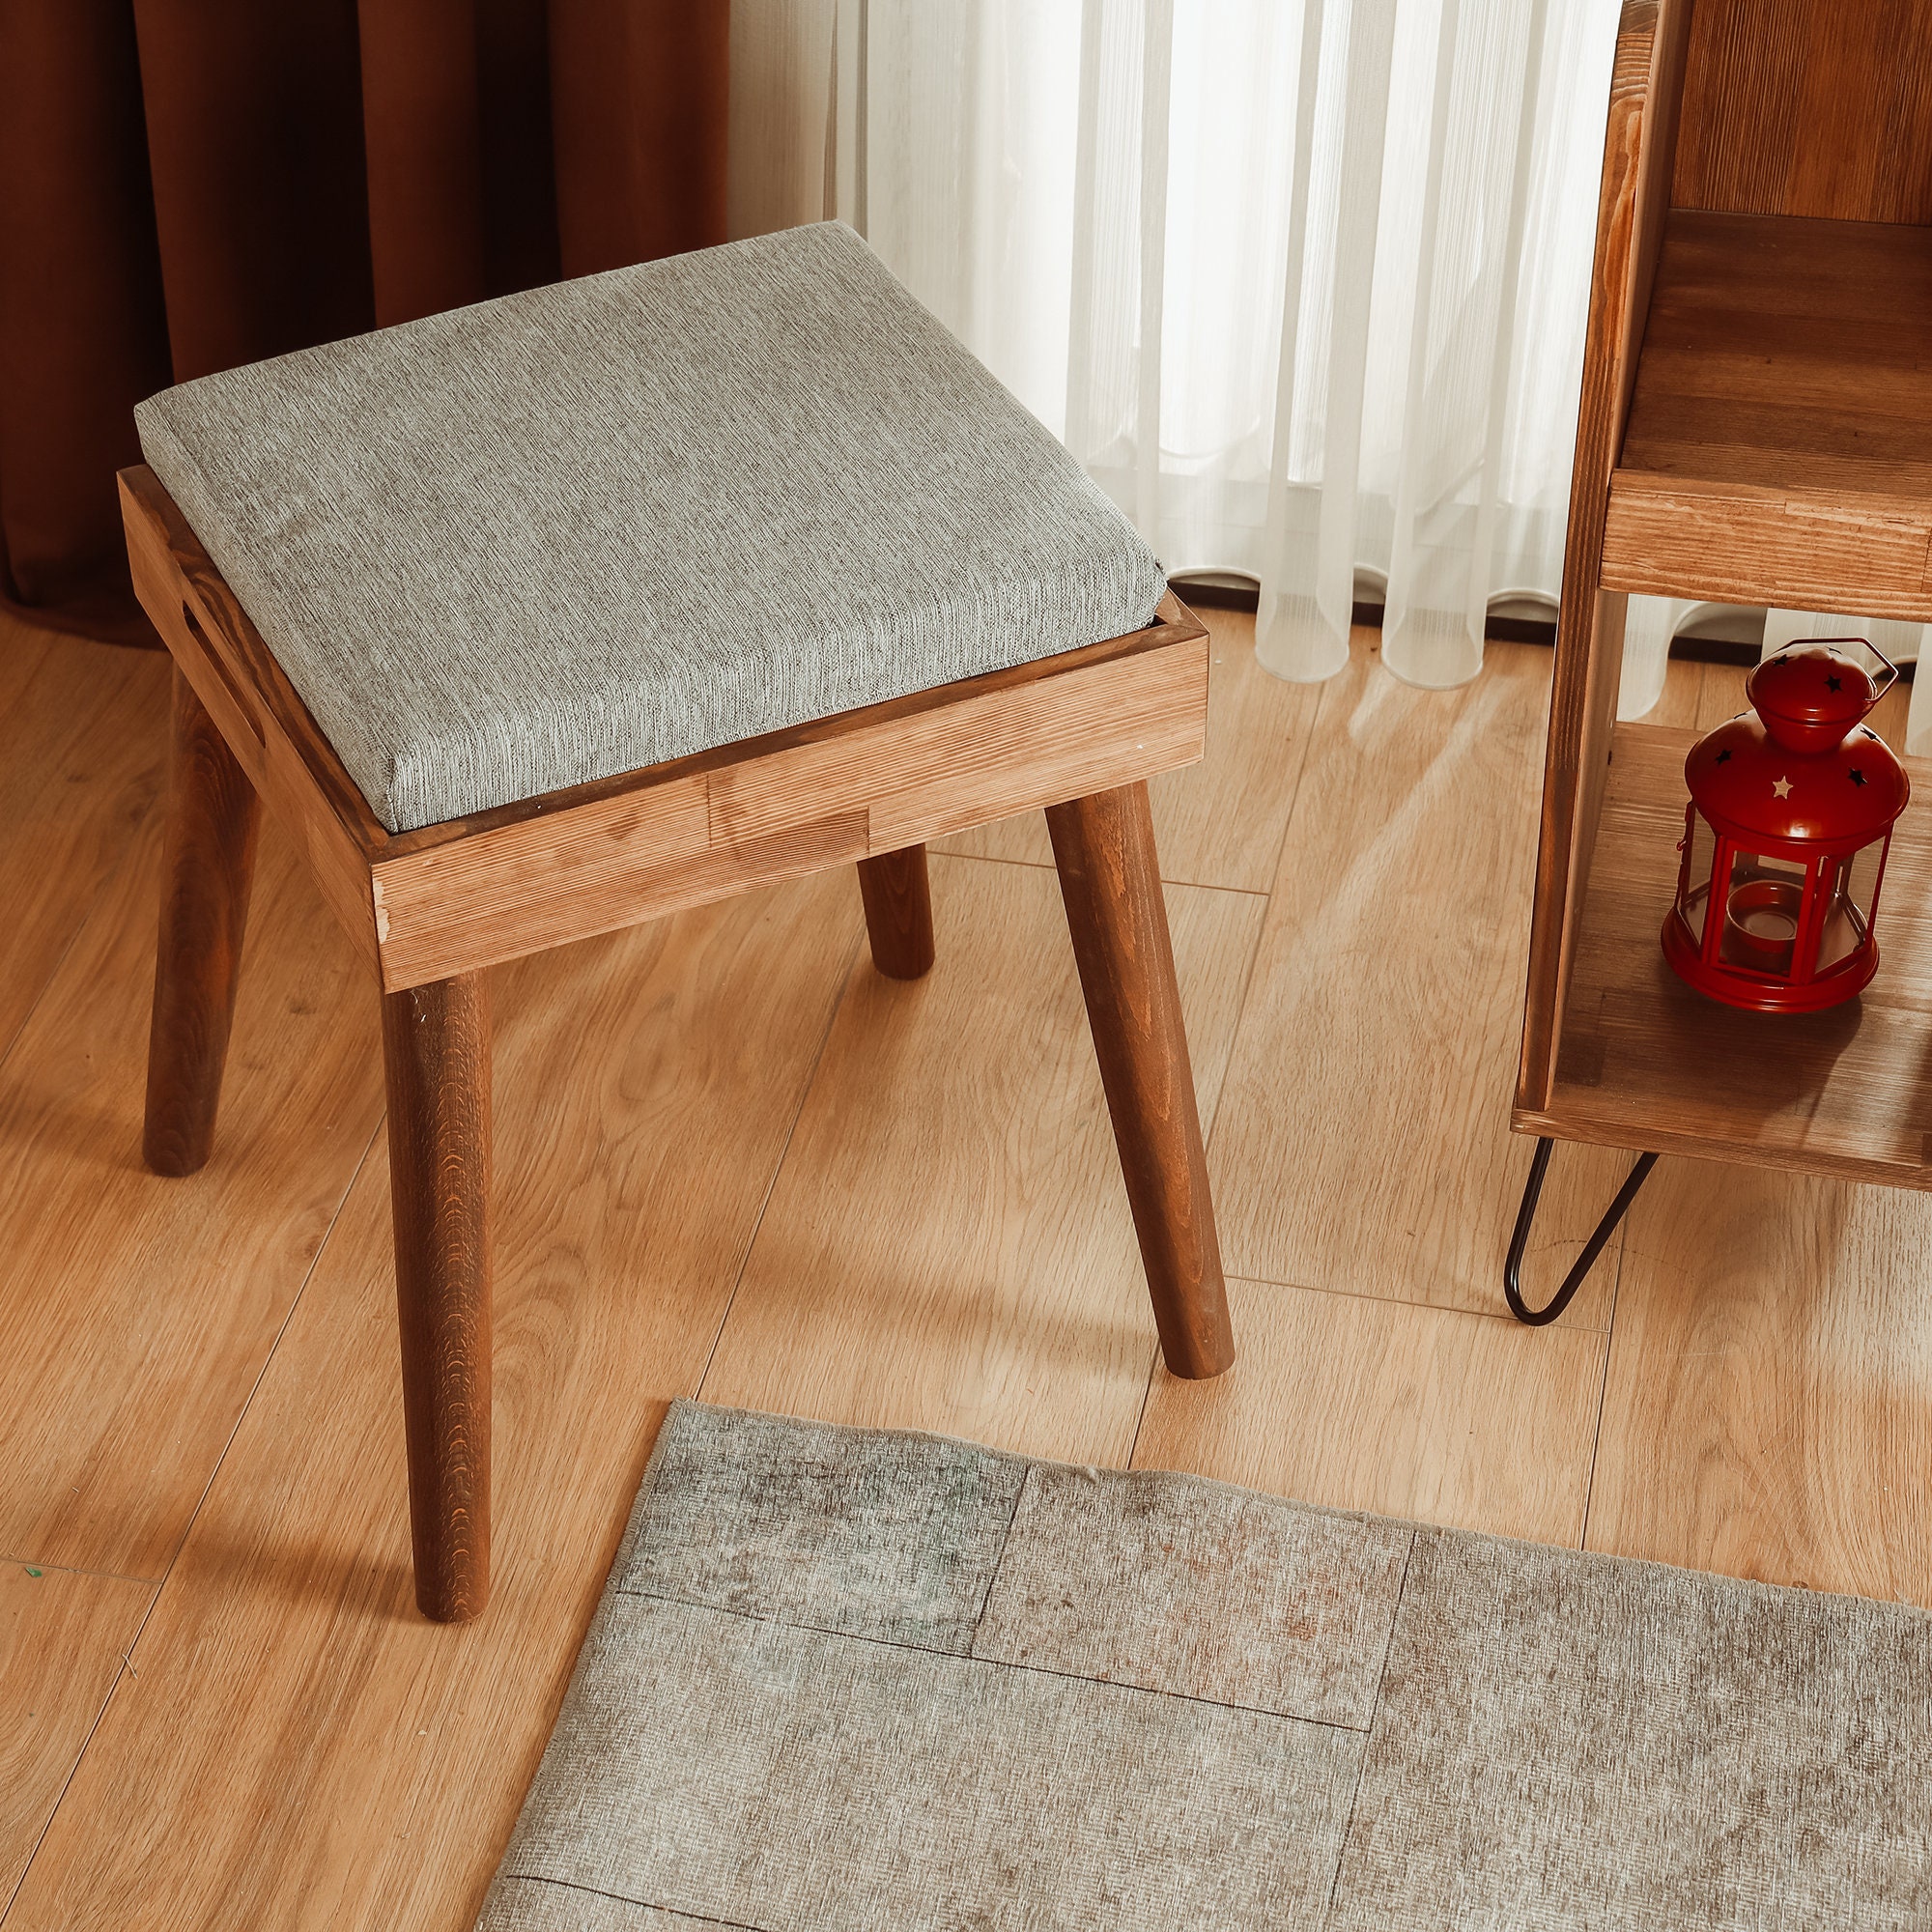 Foot Stool, Footrest Small Ottoman Stool, Elevated with Rolling Wheels-  Wooden Walnut Storage Drawer and Magazine Rack- Tapestry Top with Storage 